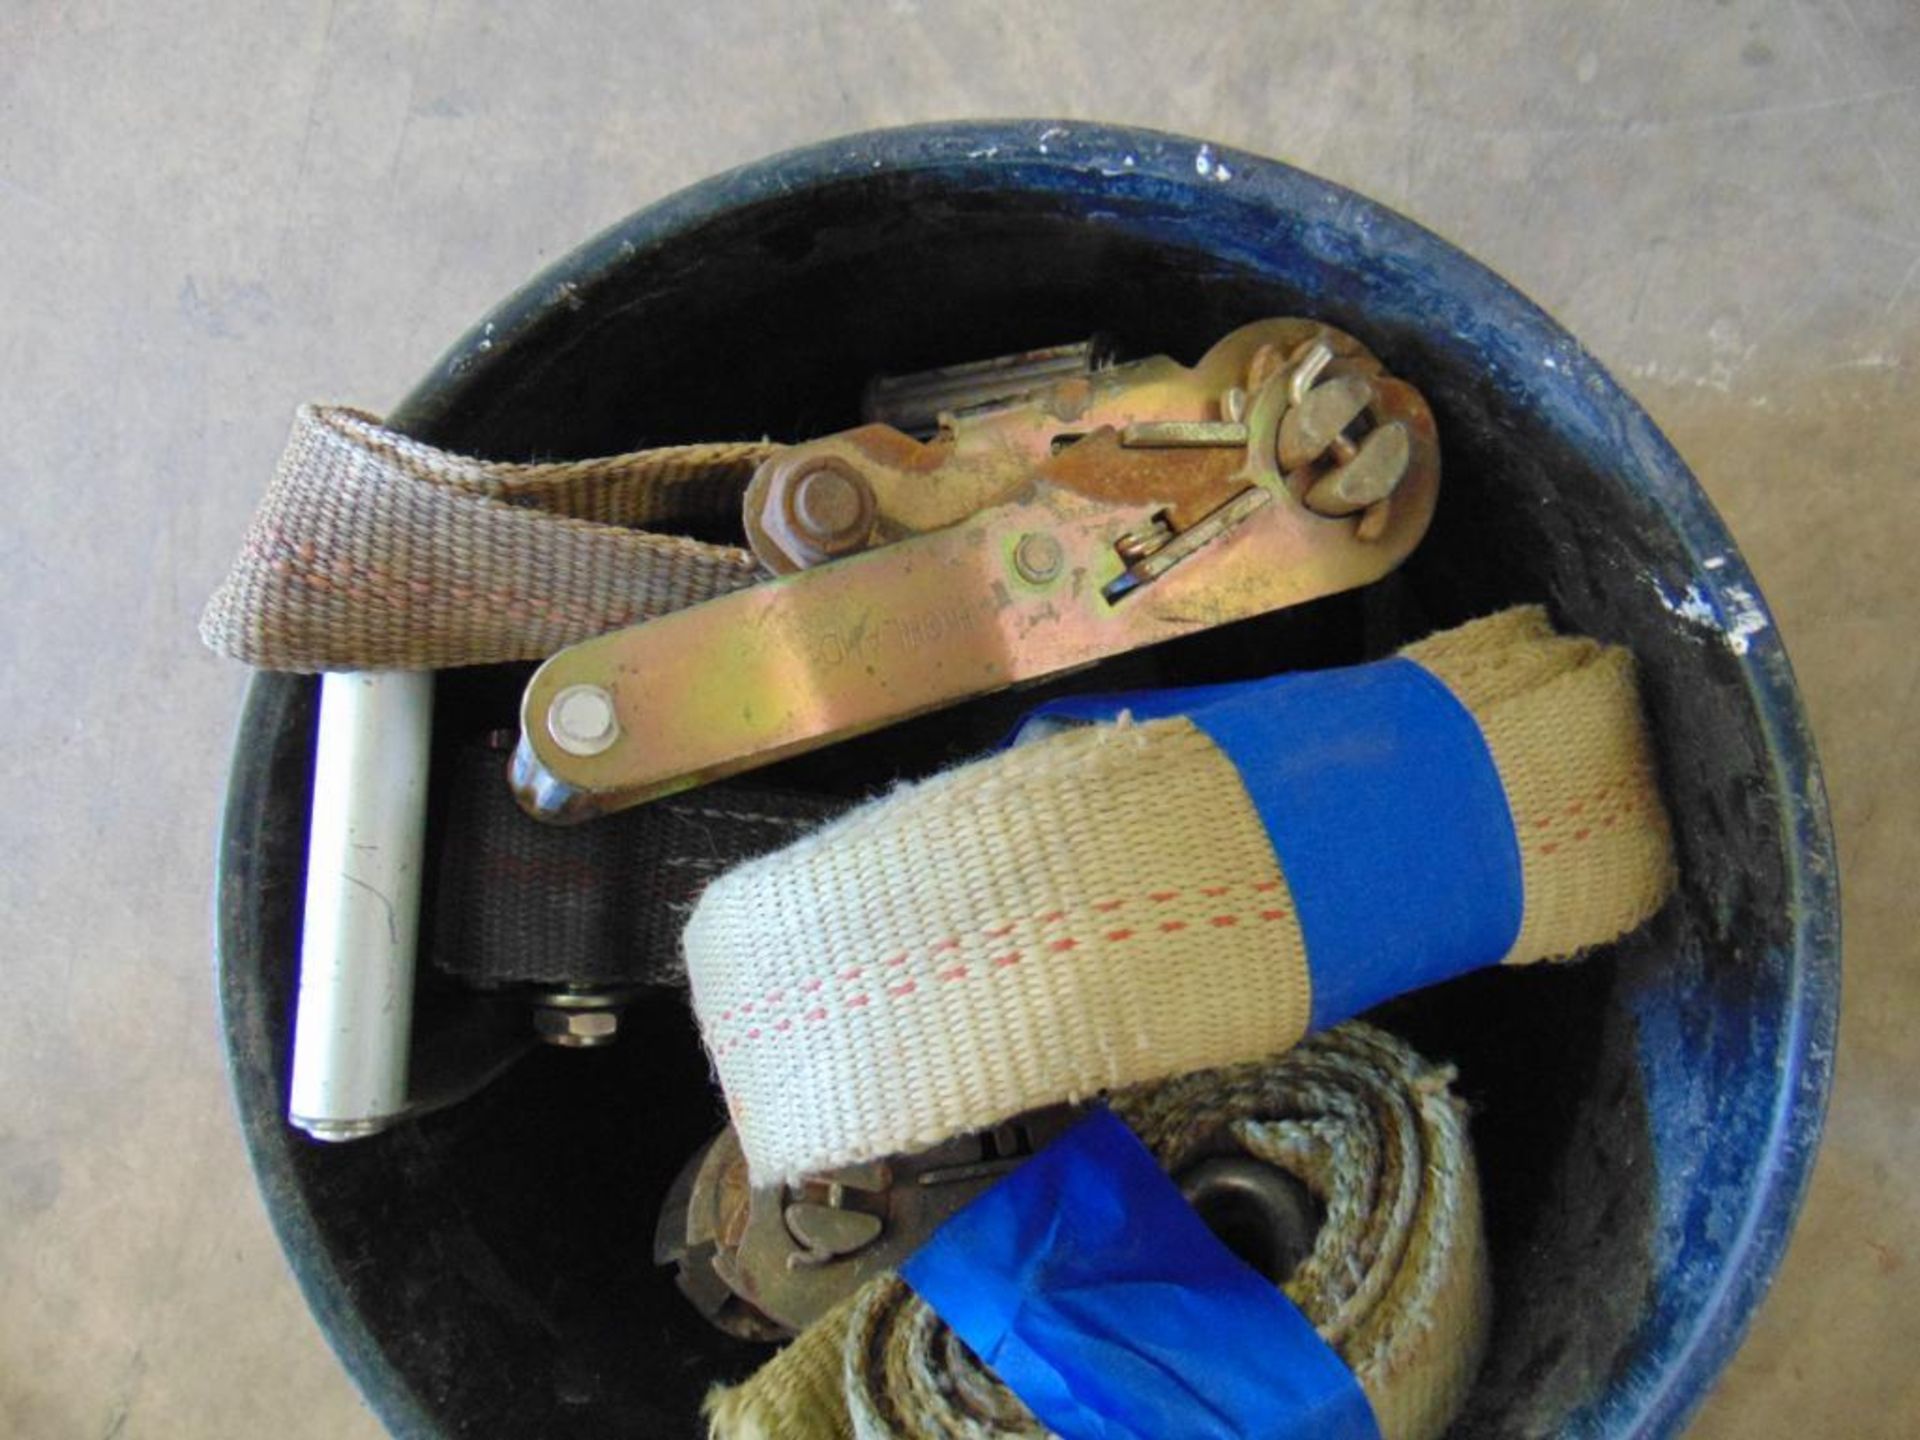 Lot of Tiedown Strap Parts - Image 3 of 3